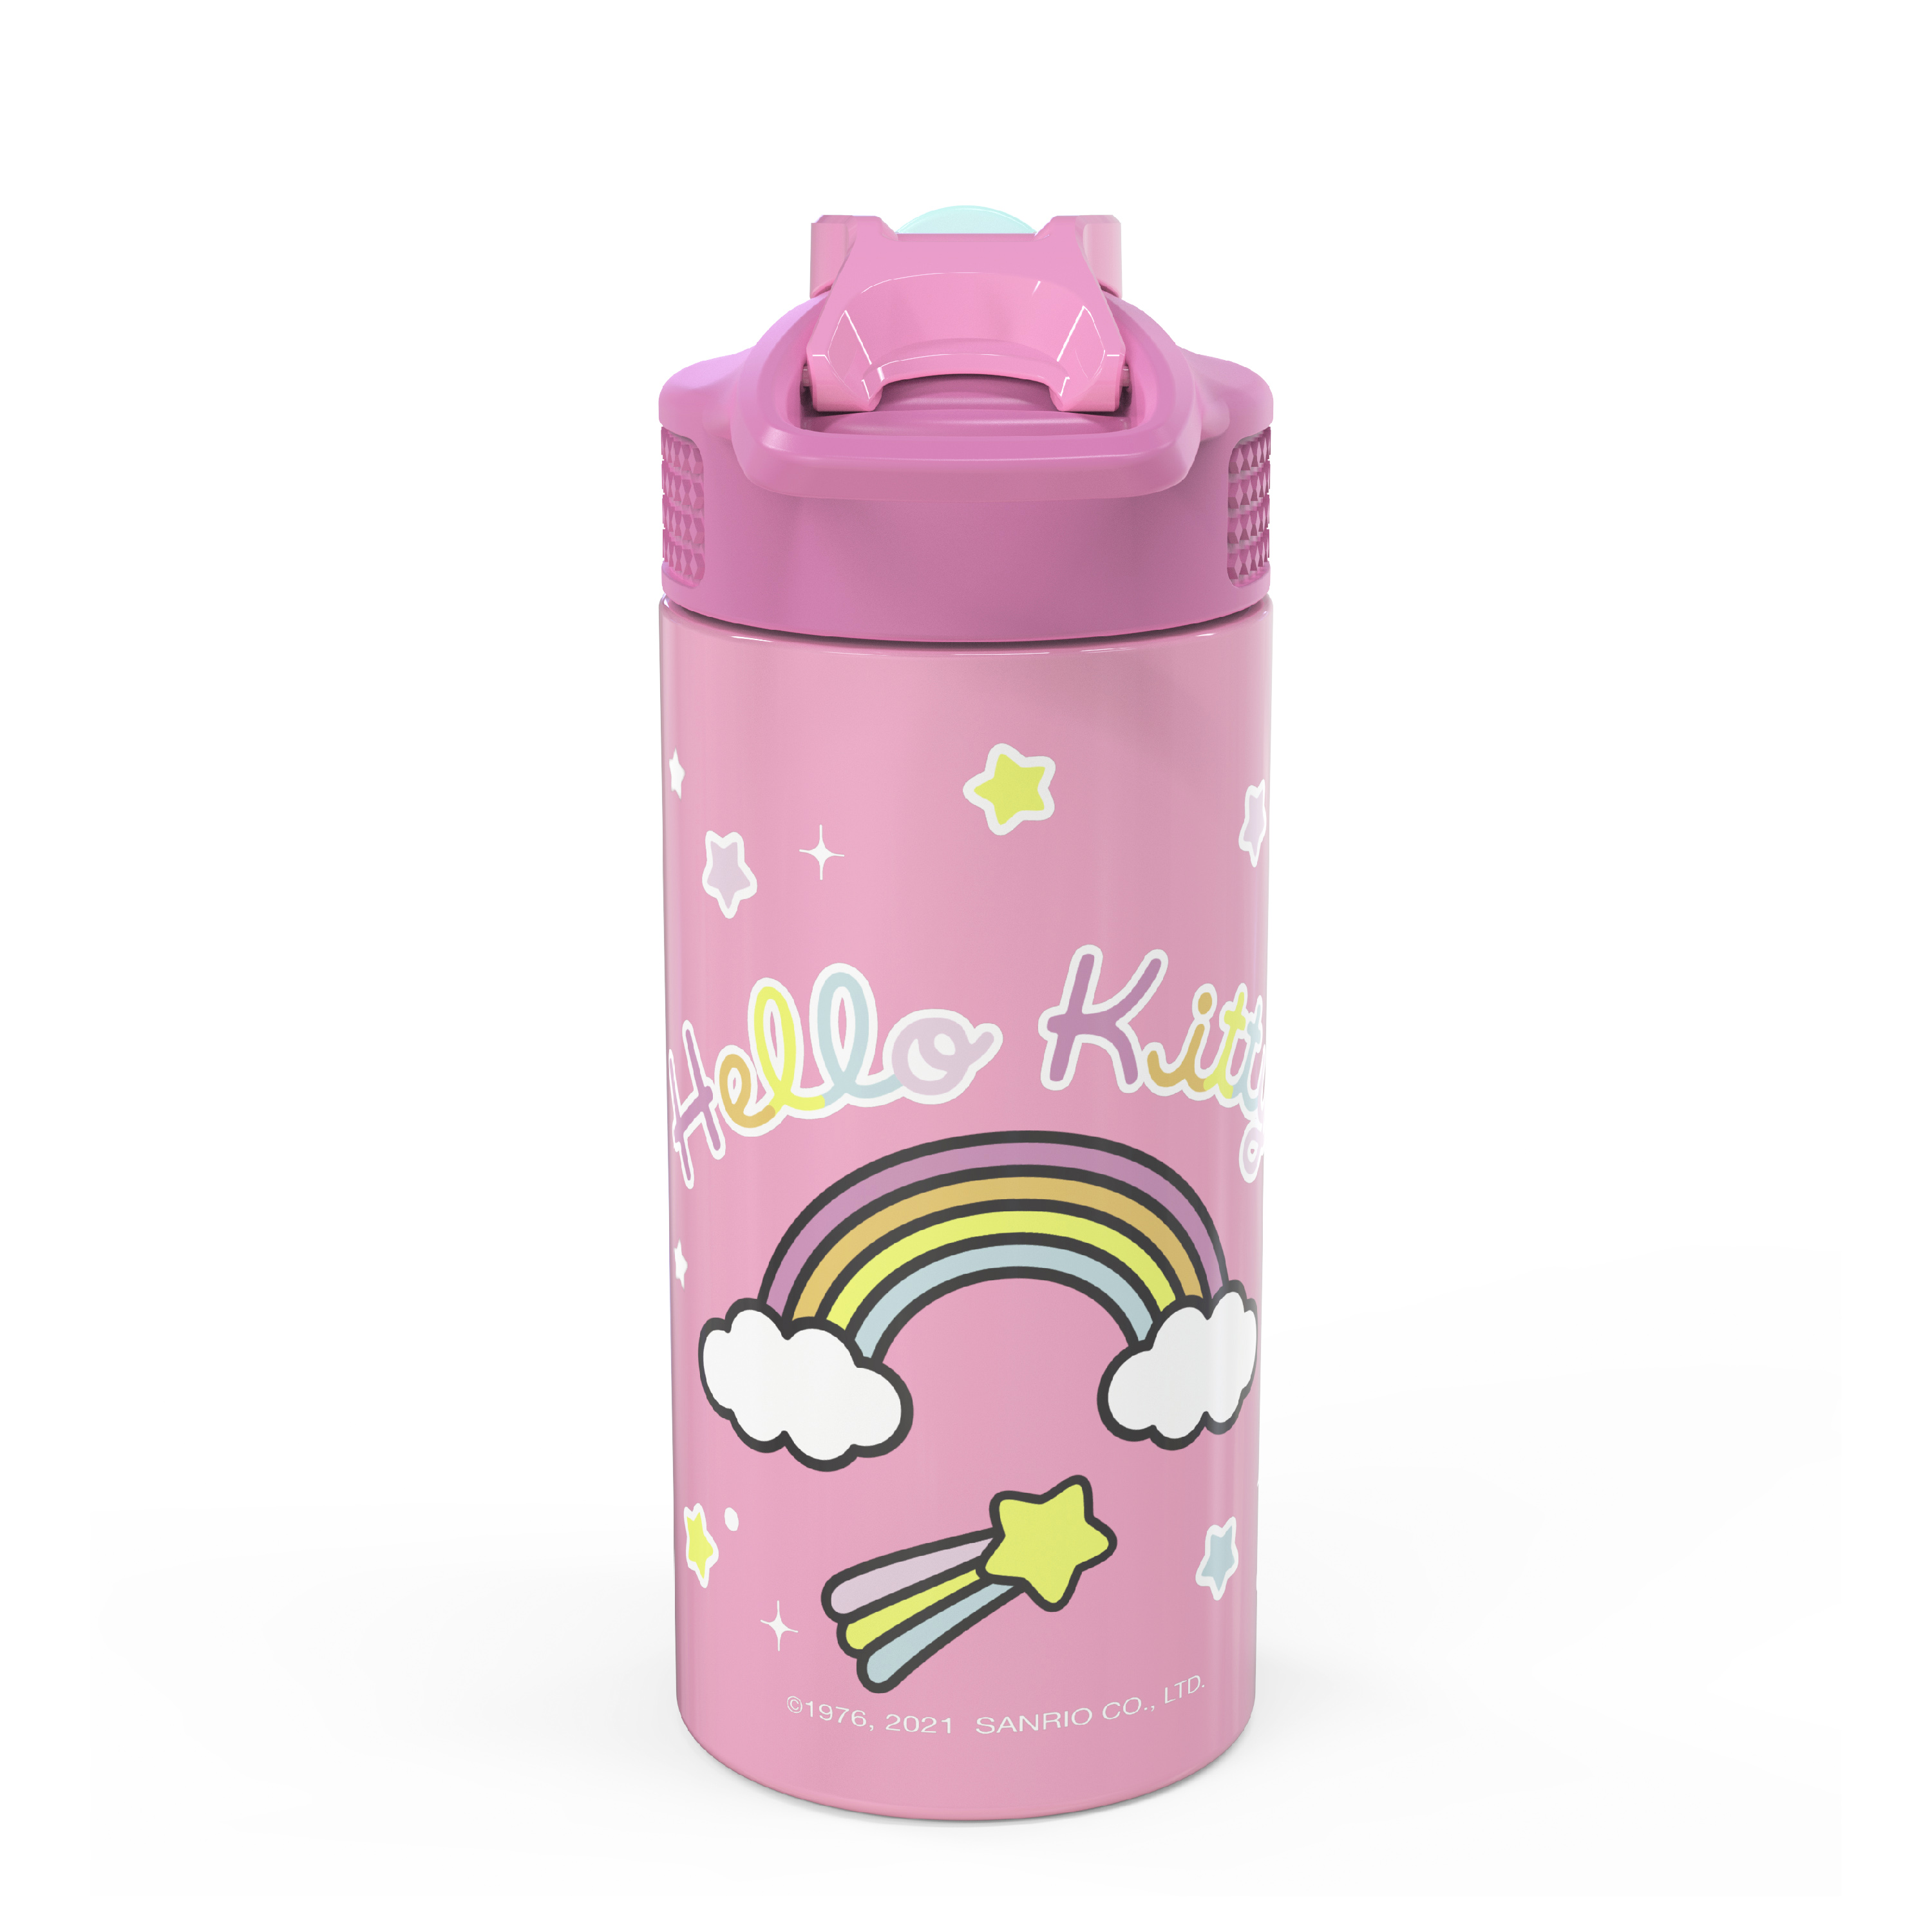 Sanrio 14 ounce Stainless Steel Vacuum Insulated Water Bottle, Hello Kitty slideshow image 2